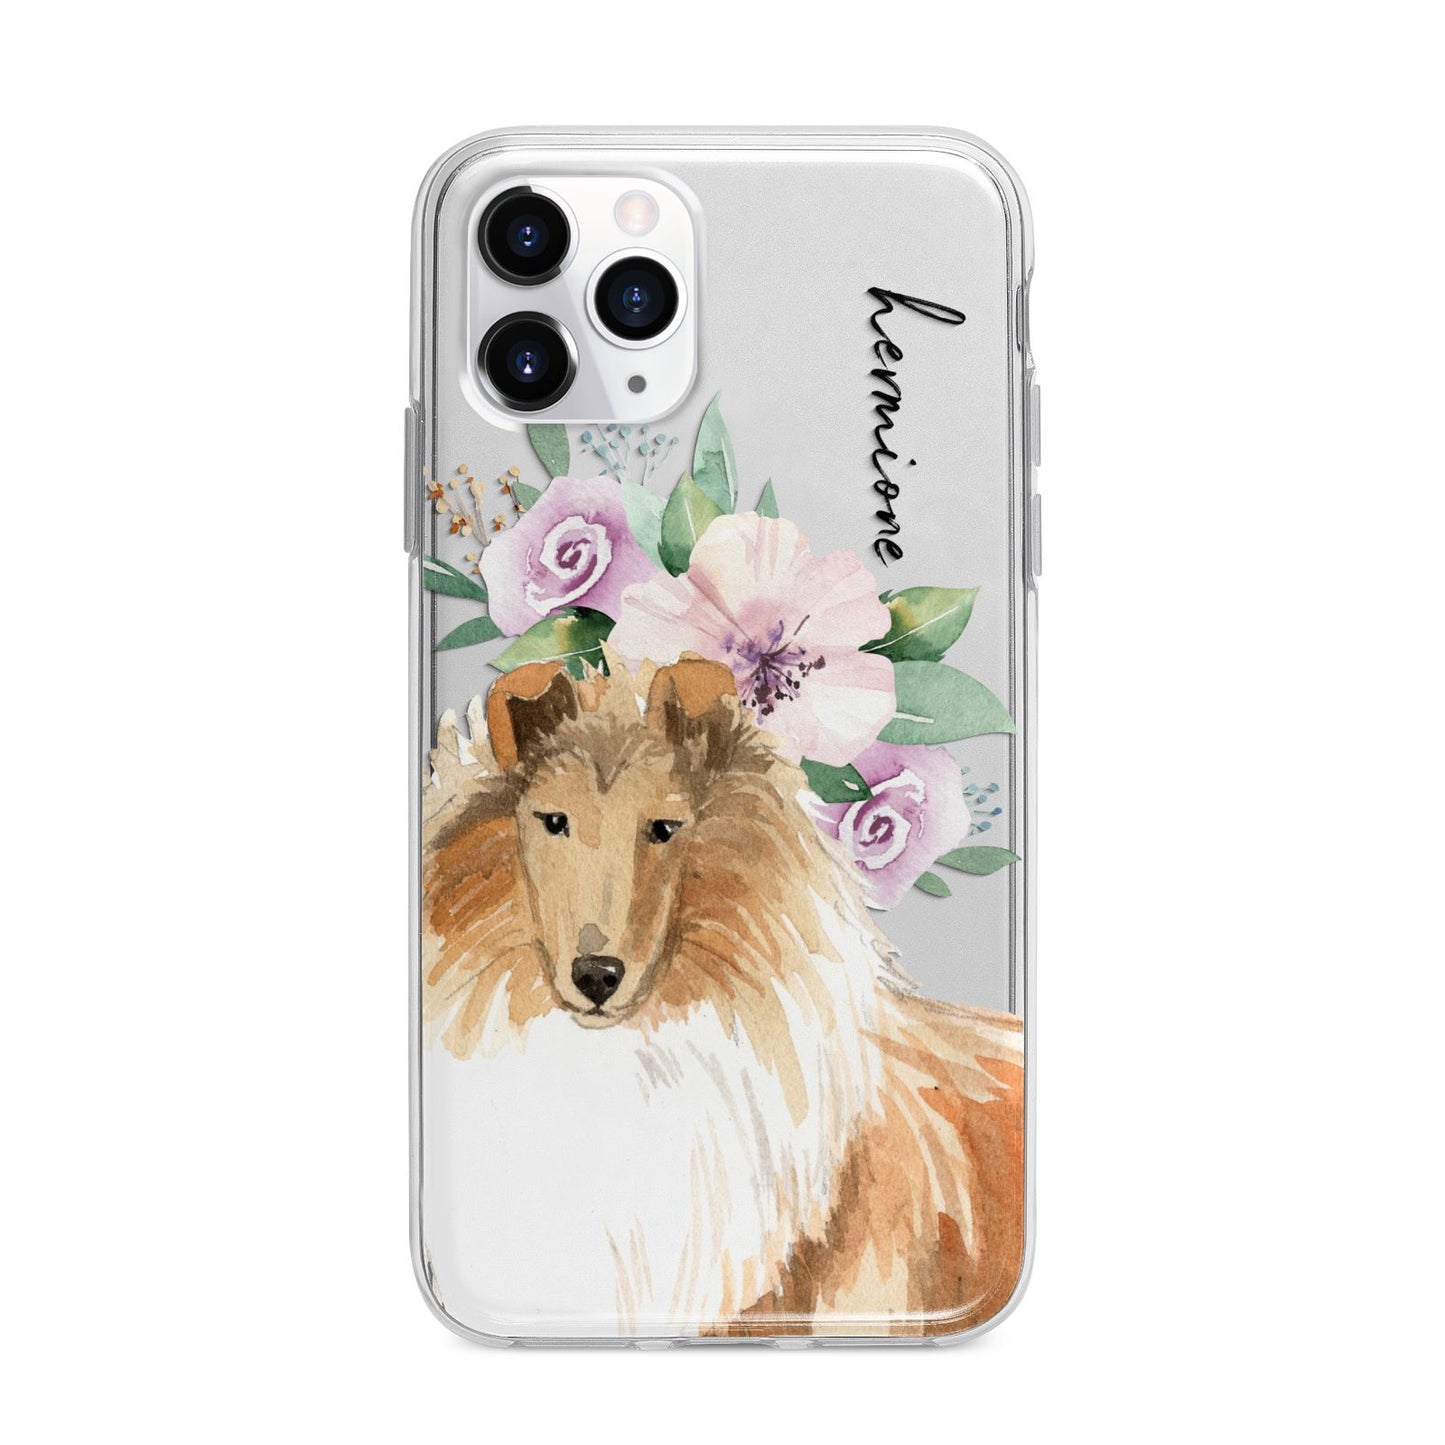 Personalised Rough Collie Apple iPhone 11 Pro Max in Silver with Bumper Case